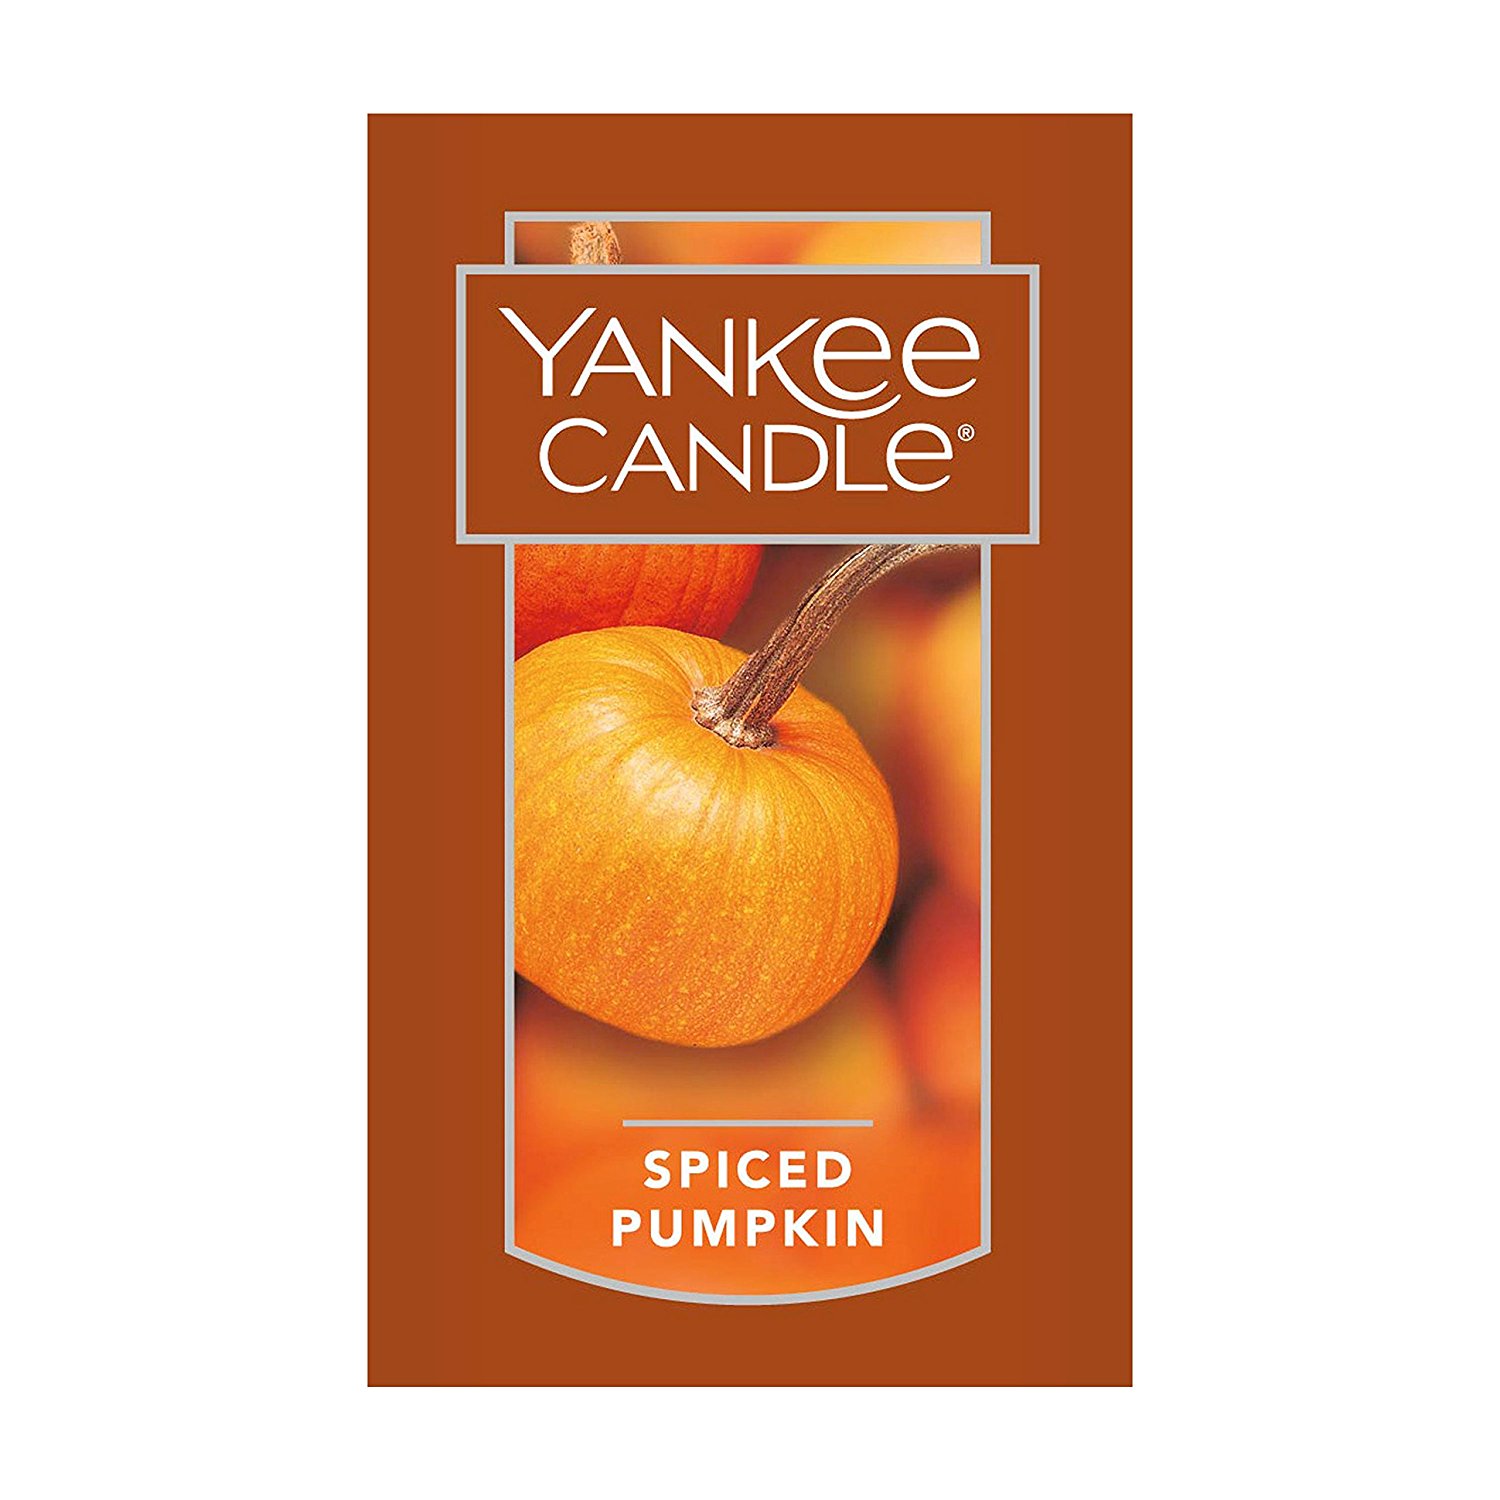 Today only: Save up to 50% on Yankee Candle jar candles